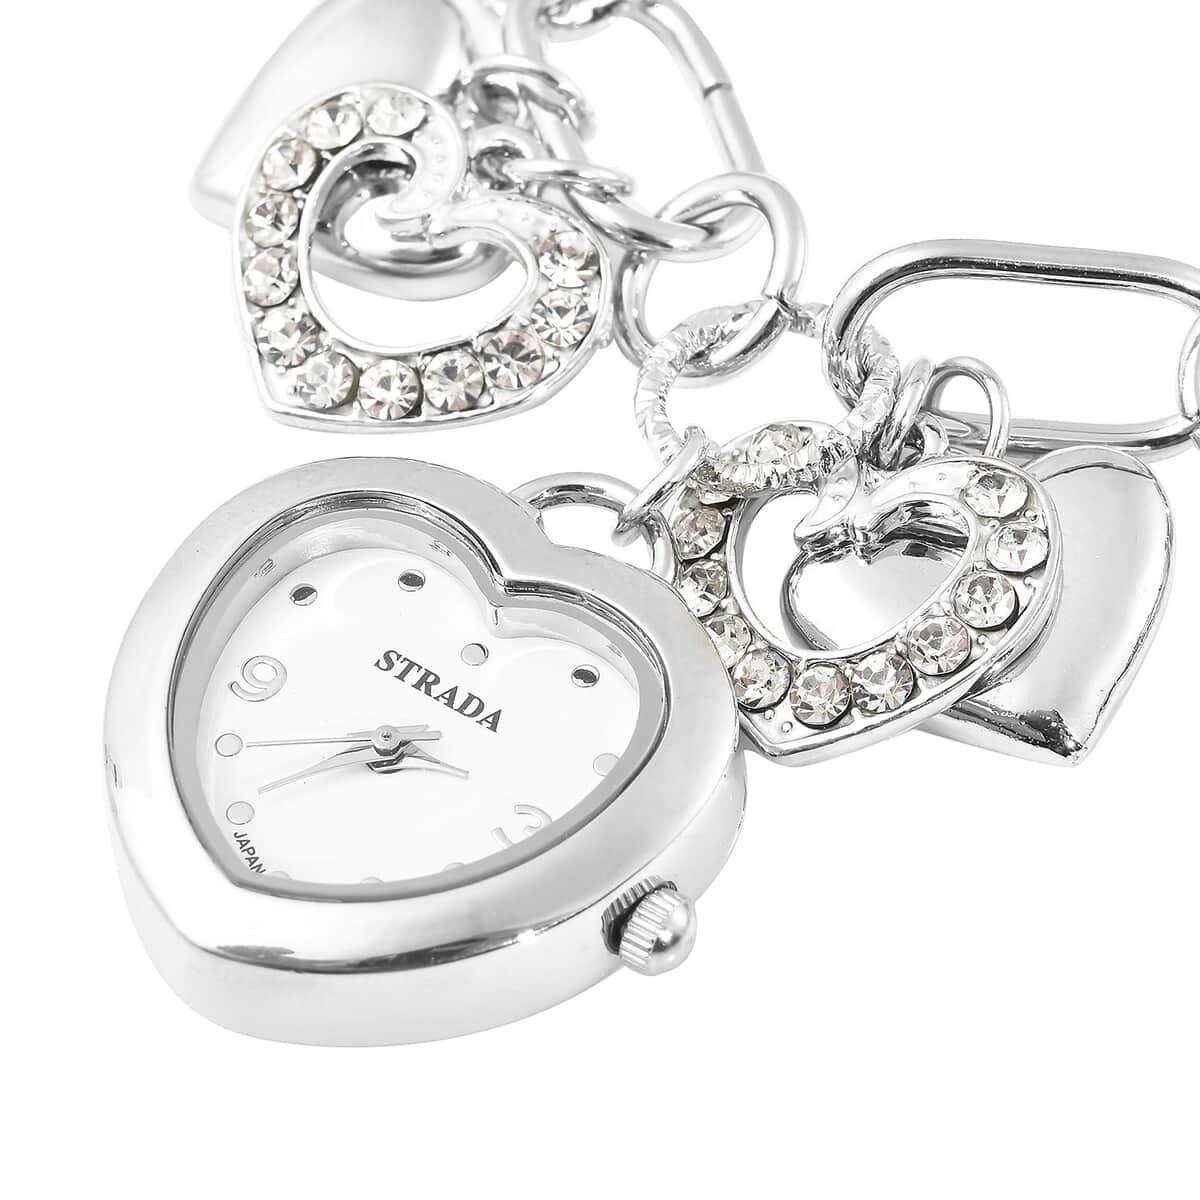 STRADA White Austrian Crystal, Enameled Japanese Movement Charm Heart Bracelet Watch in Silvertone (7.5-9 in) image number 3